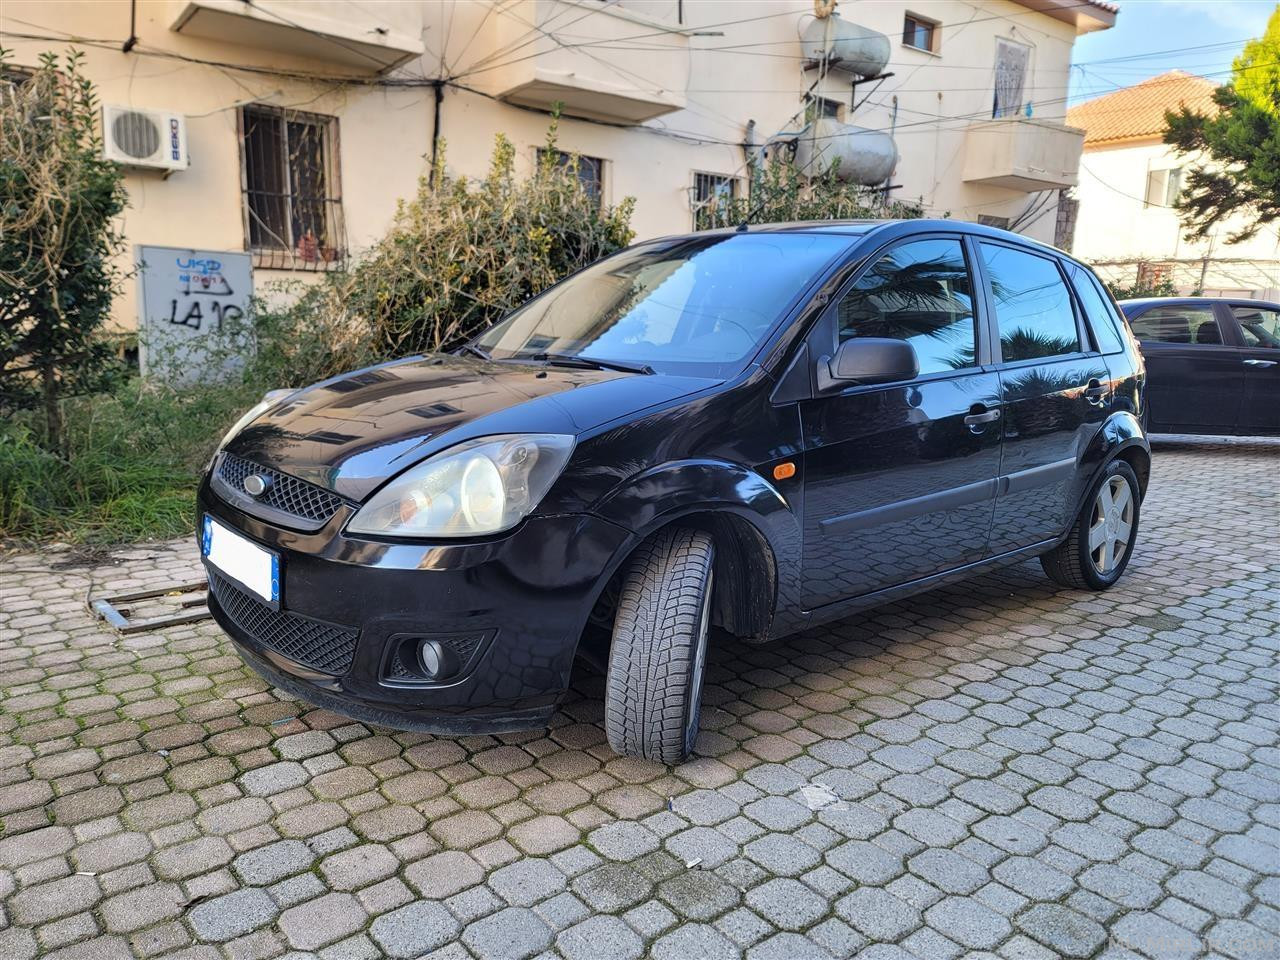 Shes Ford Fiesta 2006 - 1.4 Nafte